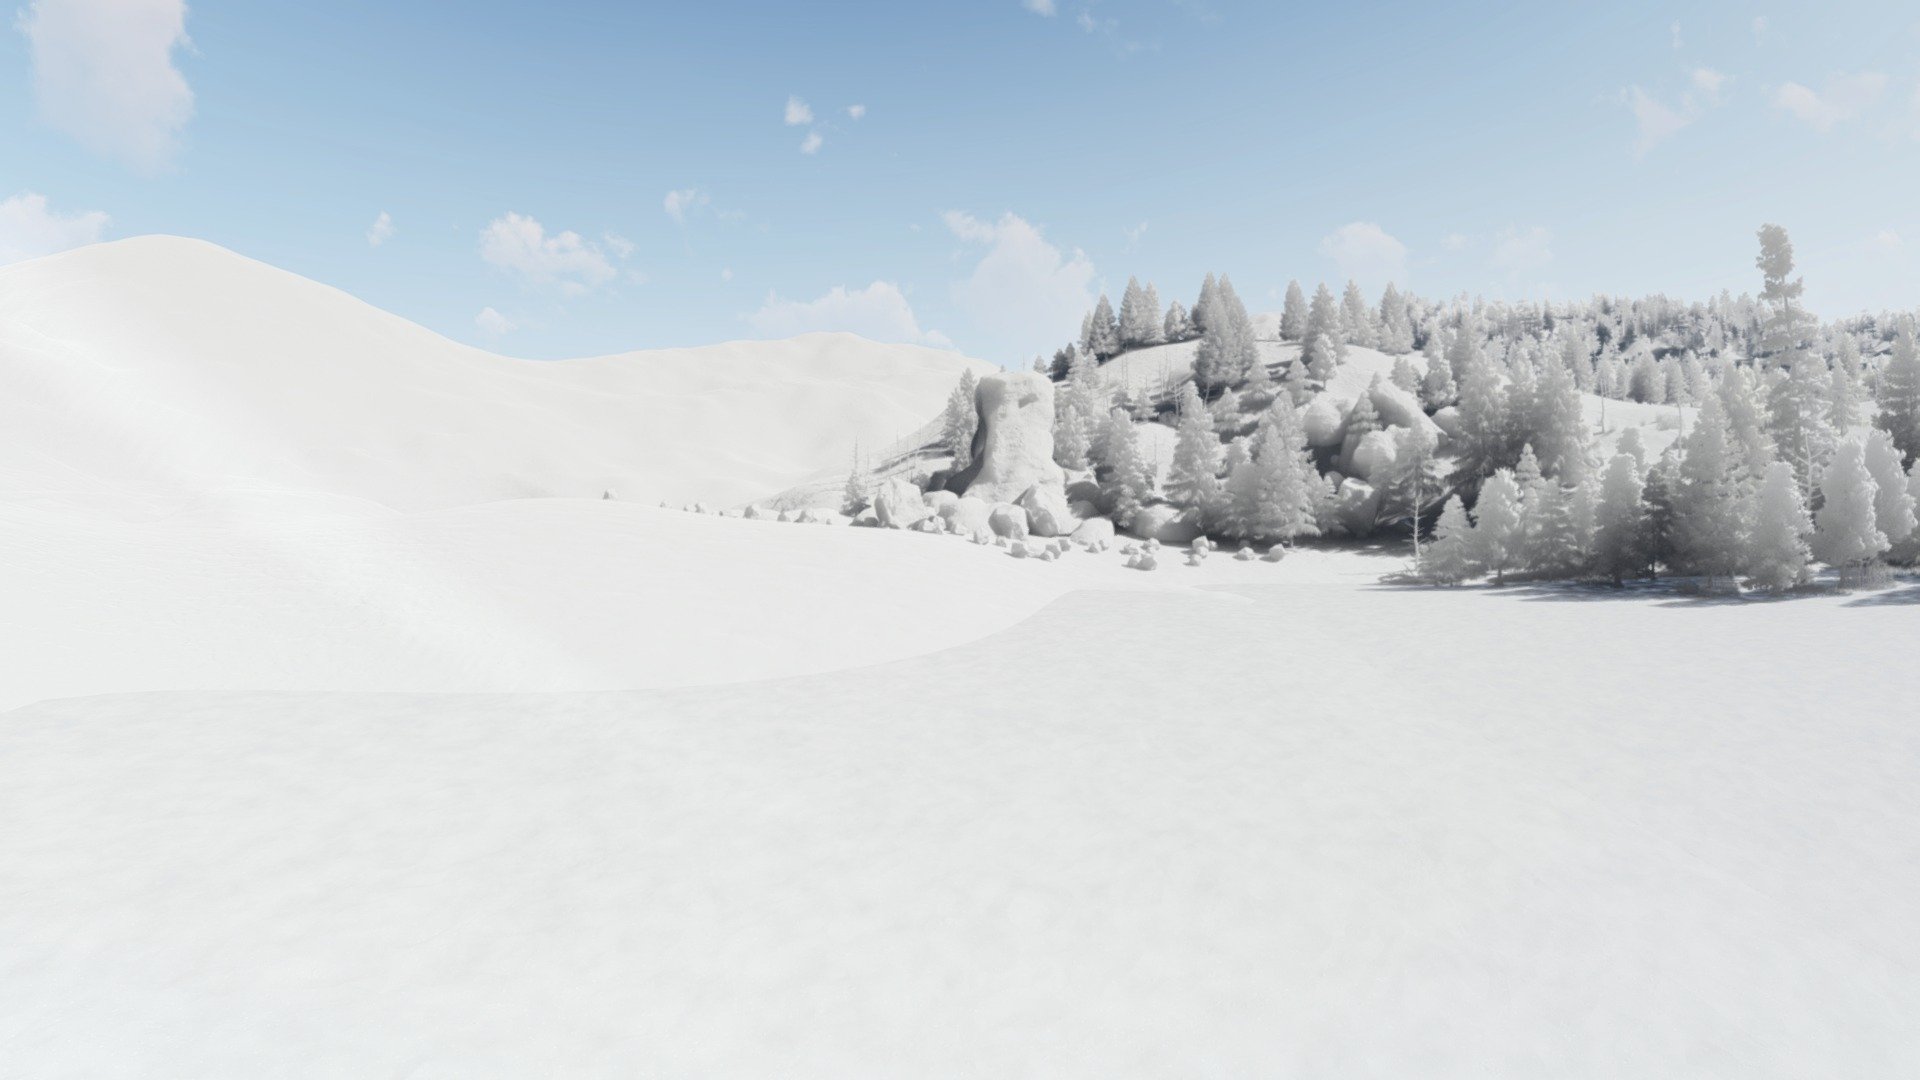 SKY BOX 8K - SNOW WHITE COVERED HILLS

Used as a landscape cover in architectural, interior and landscape design software, used as hdri images, wallpaper… - SKY BOX 8K - SNOW WHITE COVERED HILLS - 3D model by Architecture_Interior 3d model